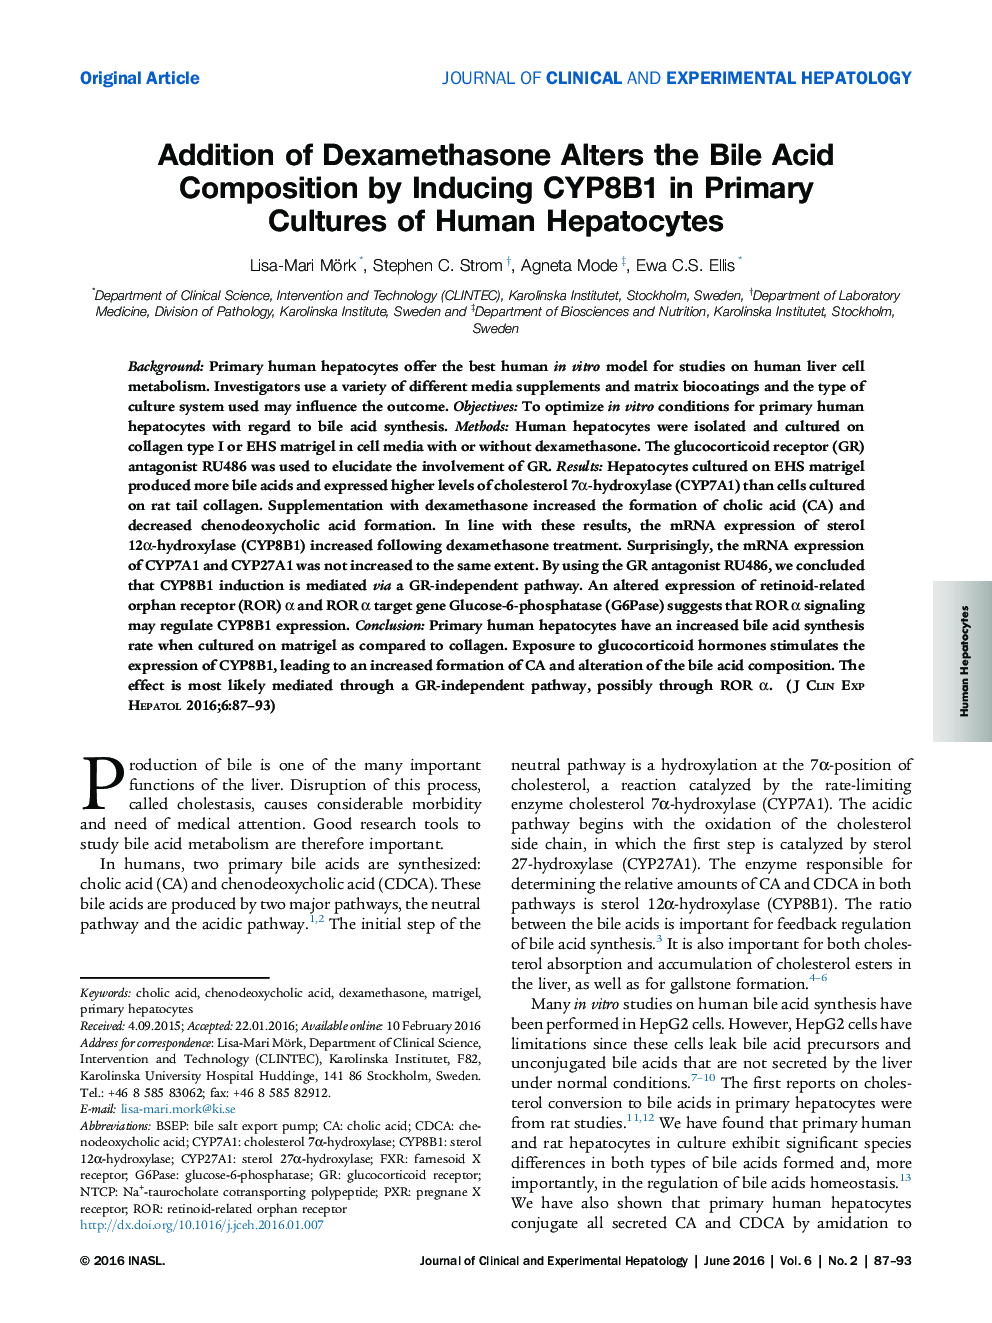 Addition of Dexamethasone Alters the Bile Acid Composition by Inducing CYP8B1 in Primary Cultures of Human Hepatocytes